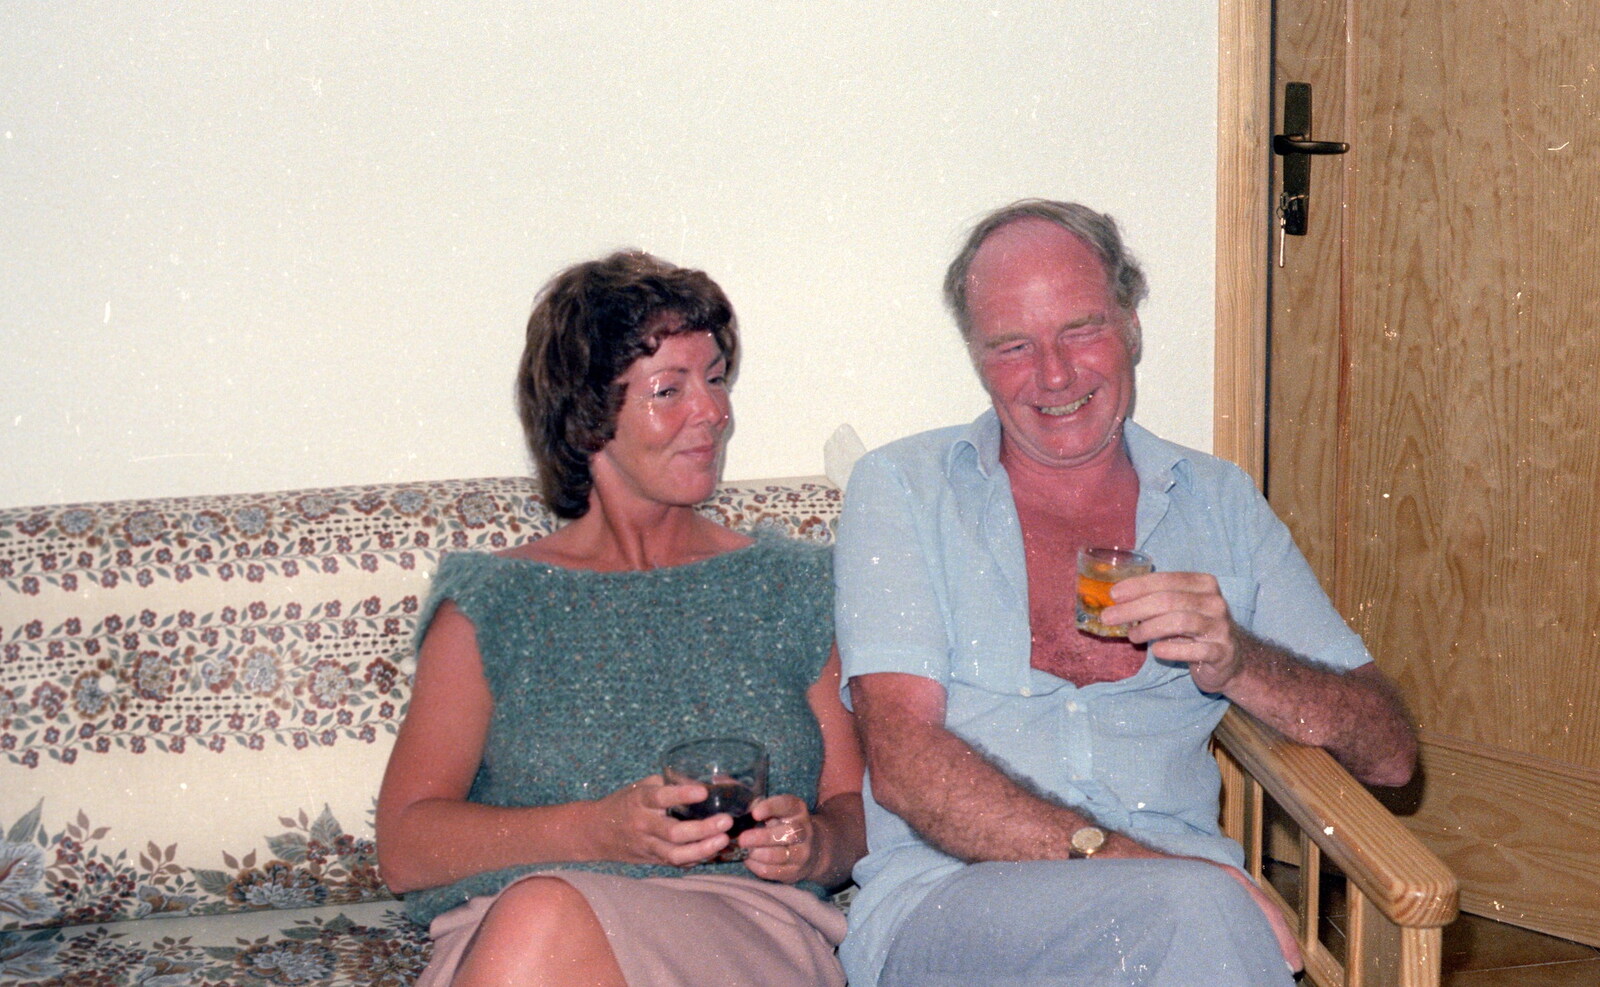 Maureen and The Old Chap from A Holiday in Los Christianos, Tenerife - 19th June 1985